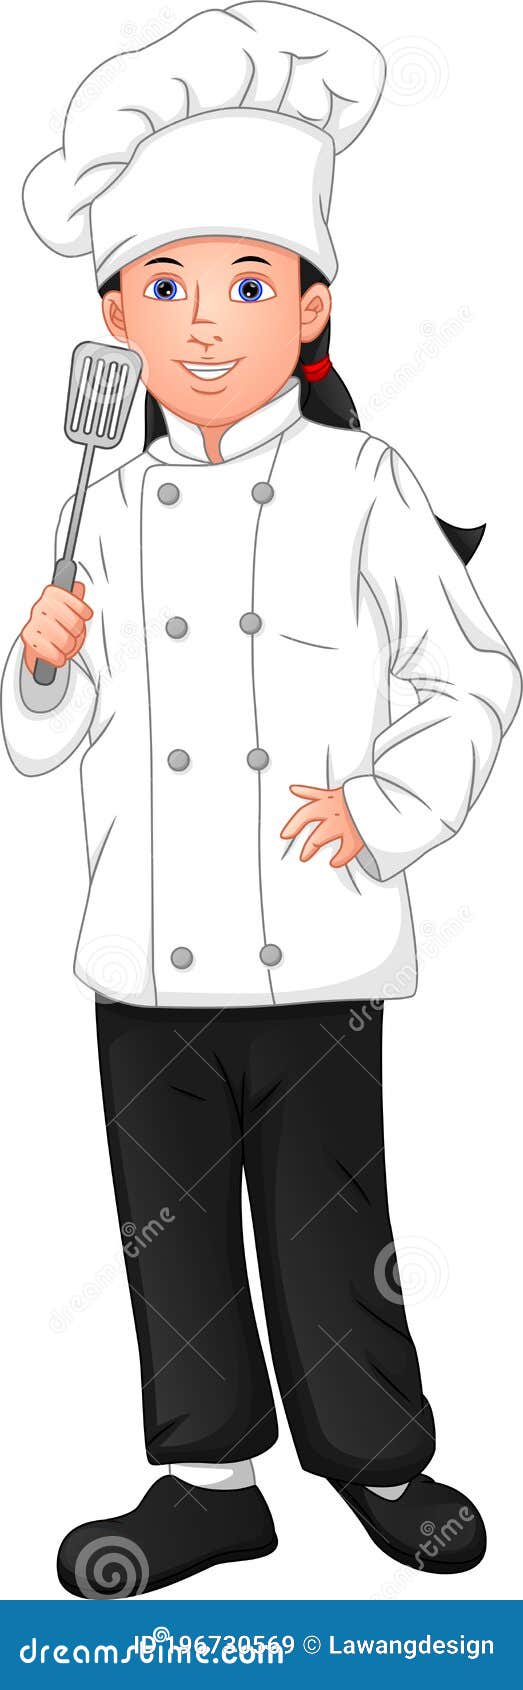 Cute Young Girl Chef Holding Spatula Stock Vector - Illustration of ...